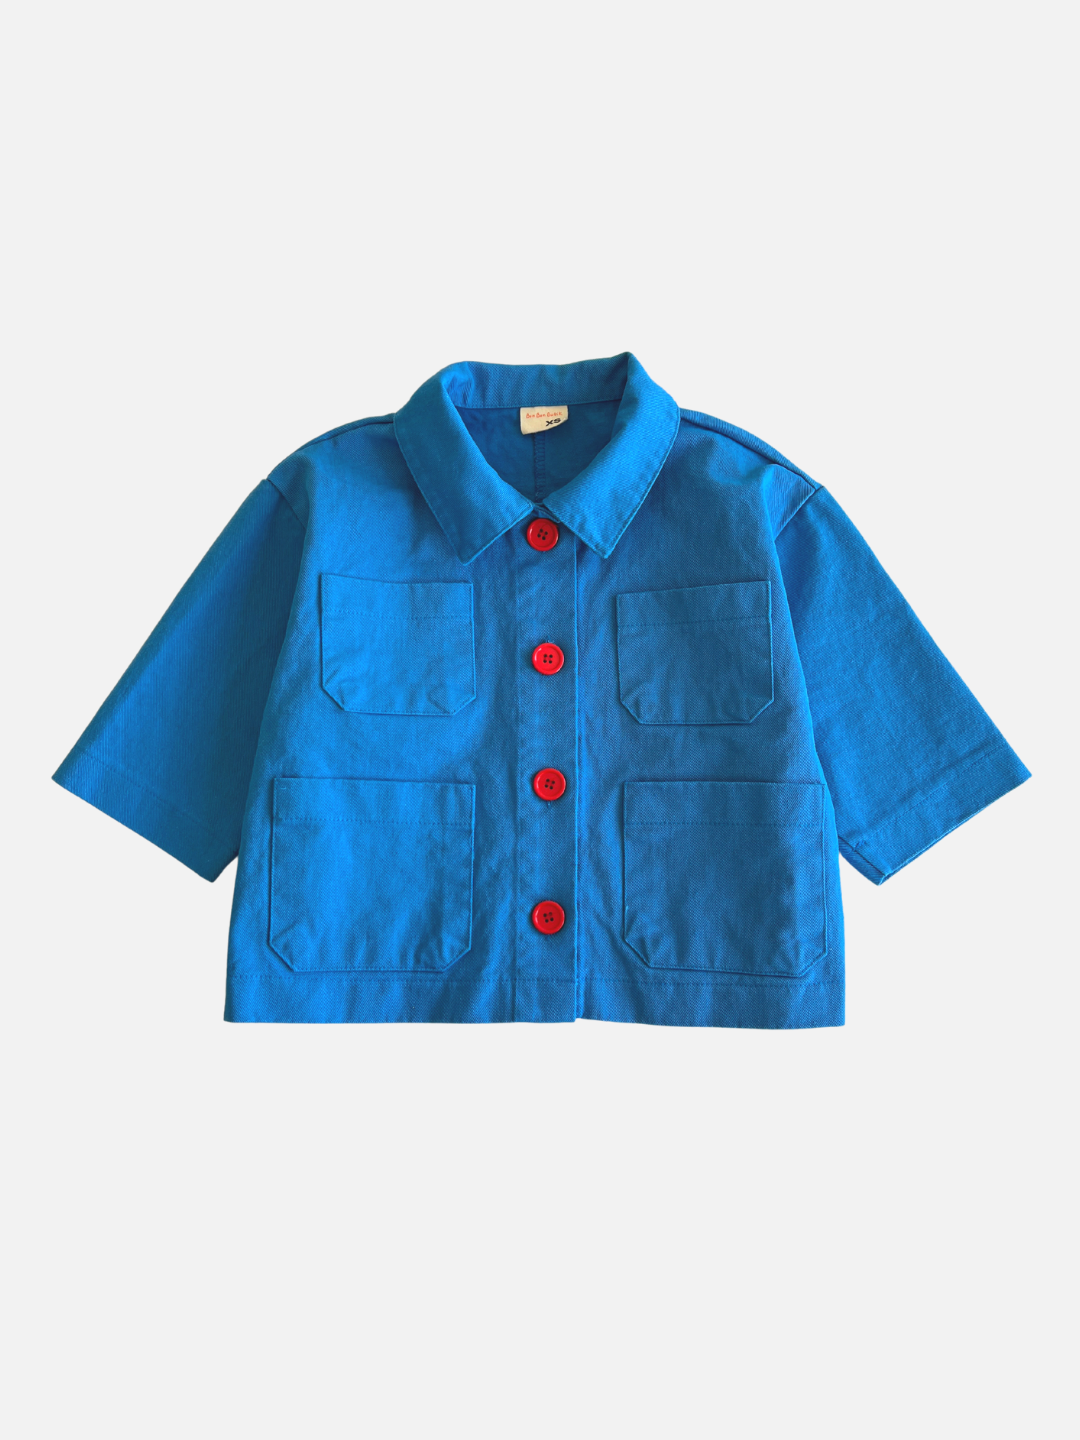 Blue | A kids' sky blue jacket with four pockets and four orange buttons